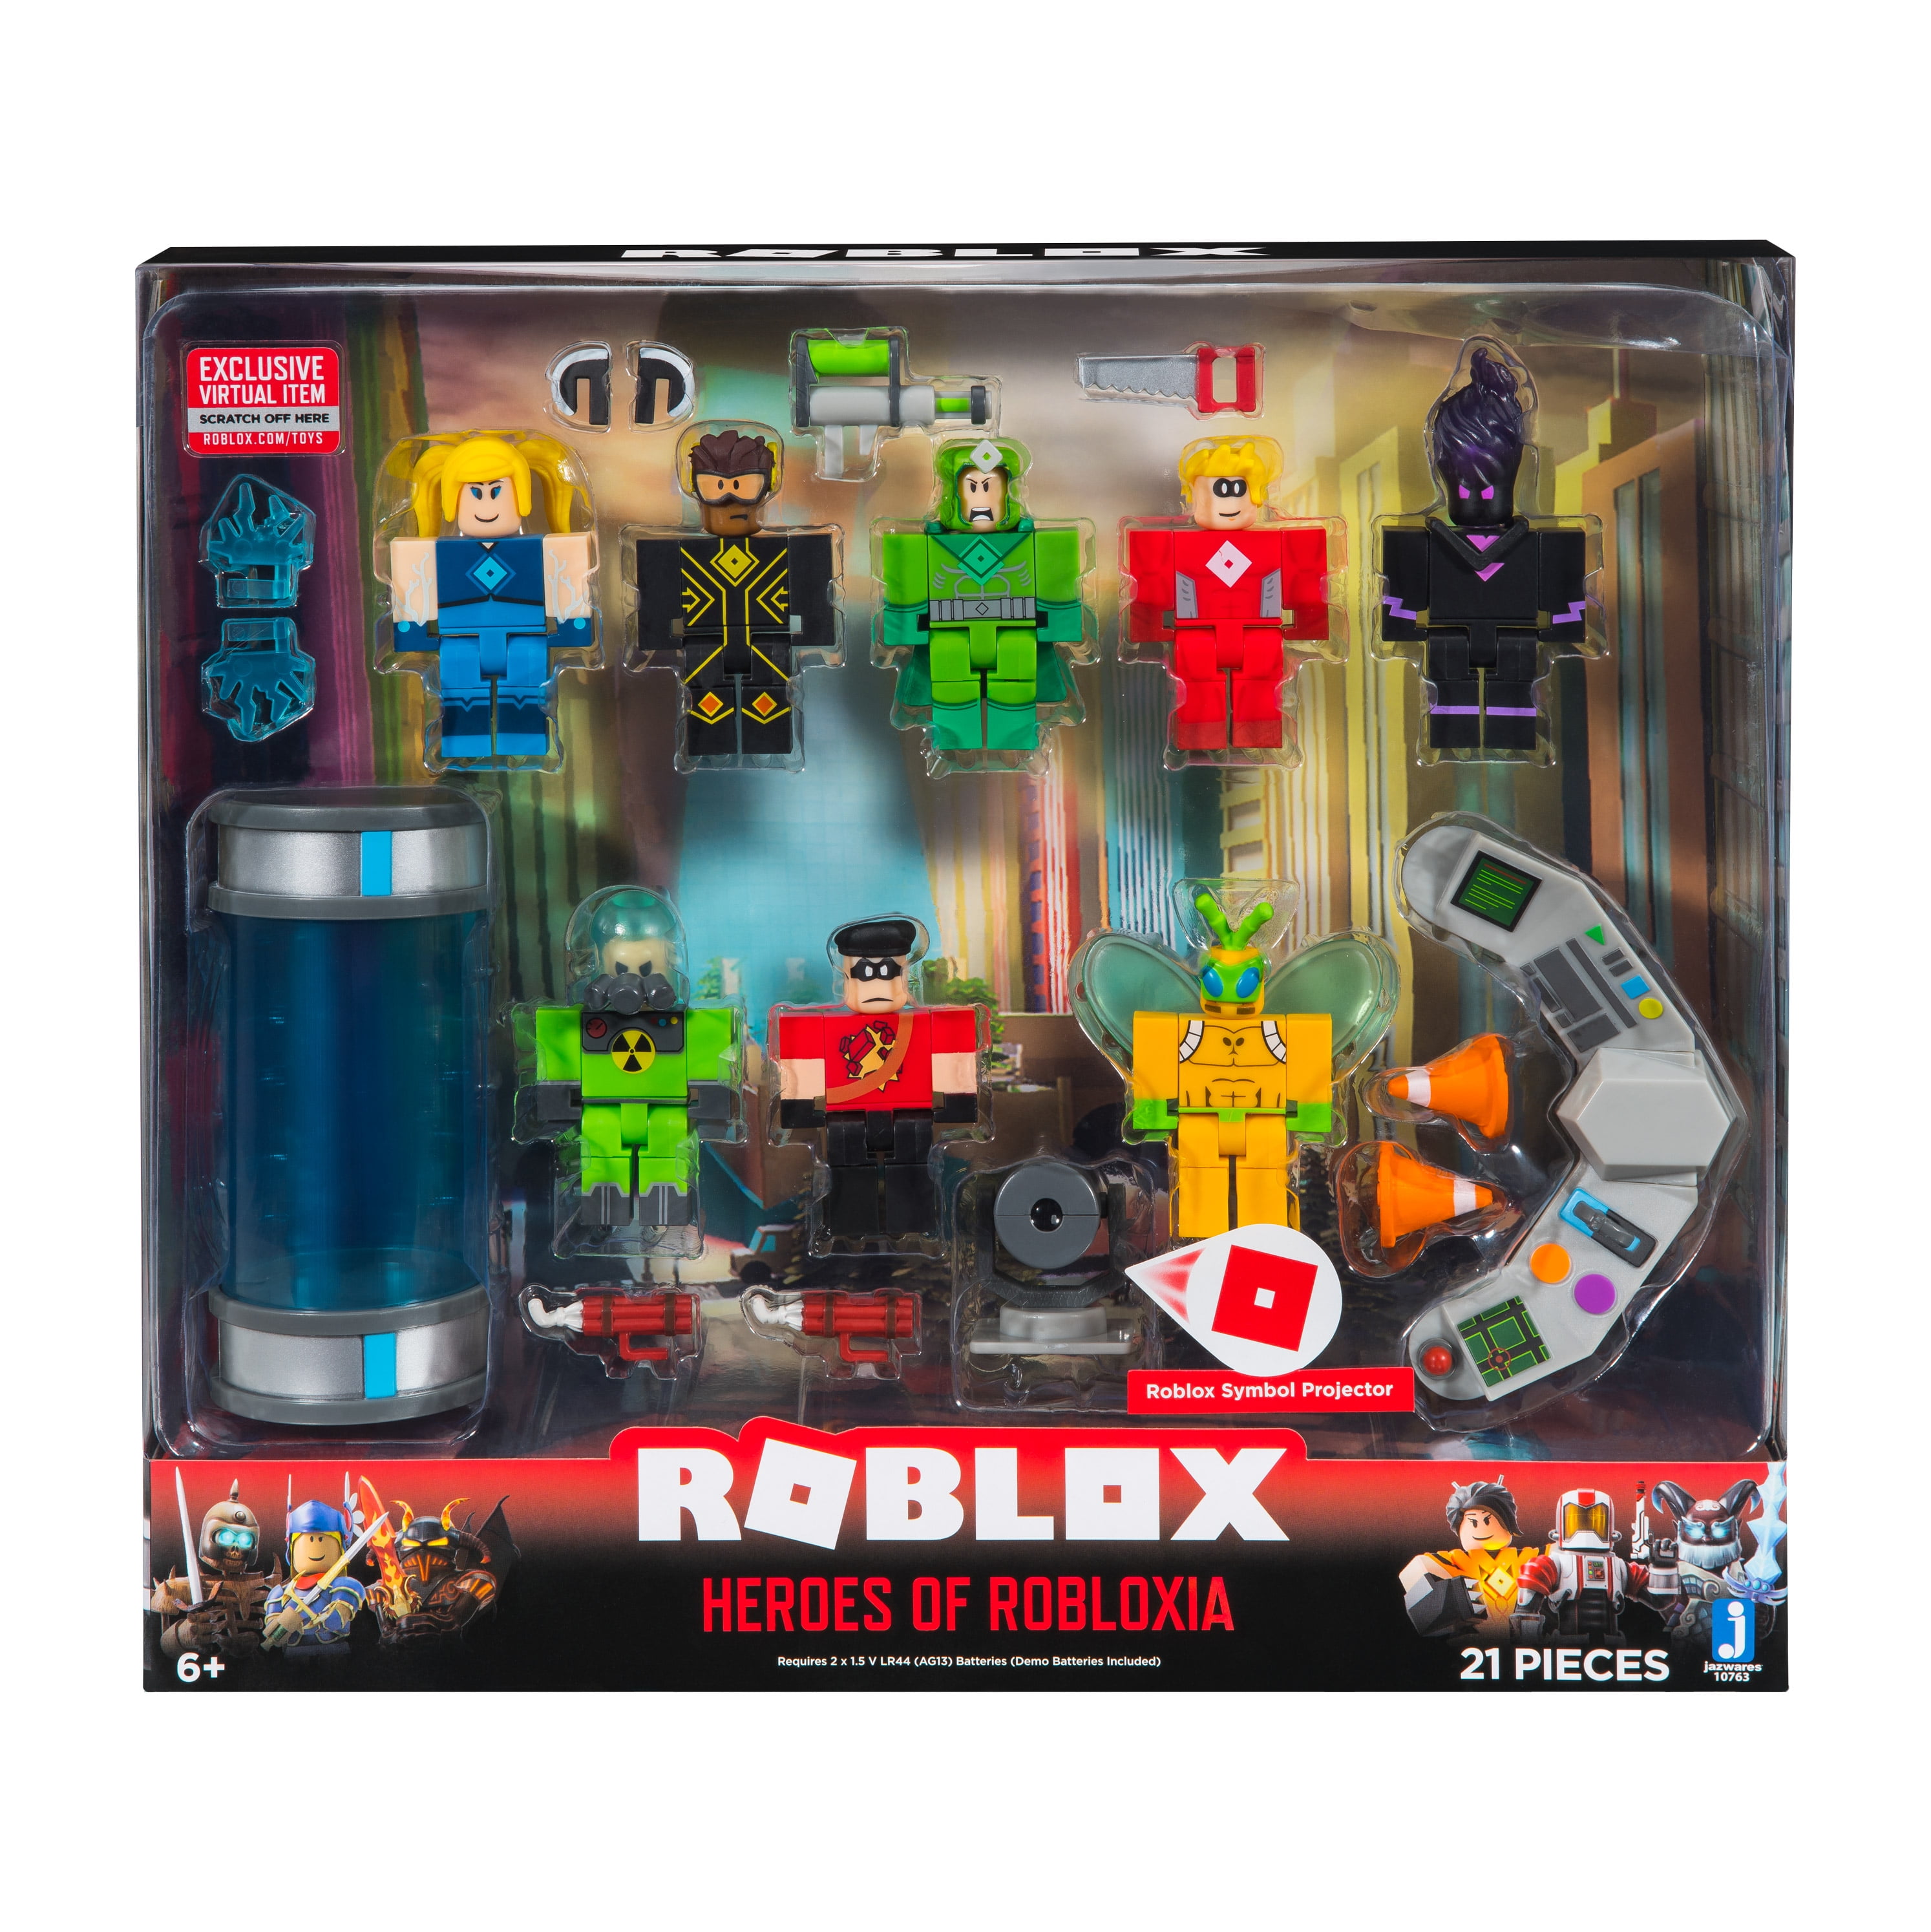 Roblox Action Collection Heroes Of Robloxia Playset Includes Exclusive Virtual Item Walmart Com Walmart Com - toy heroes roblox games